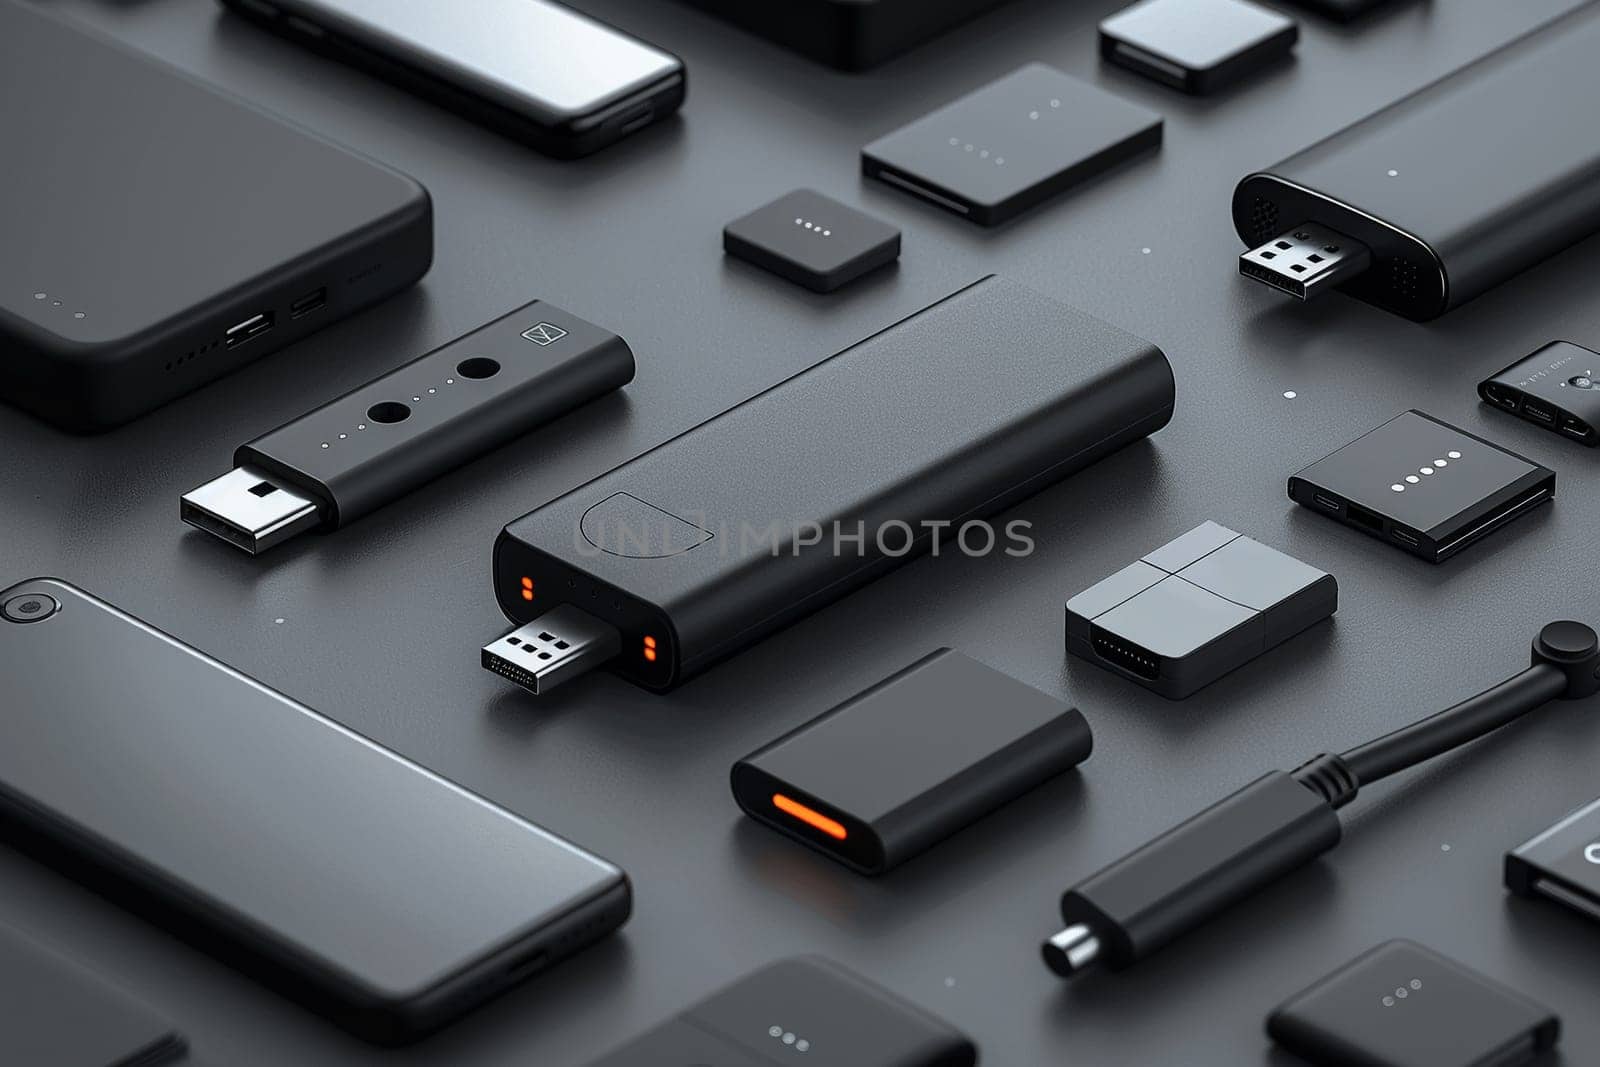 Minimalist Flash Drive Mockup, various angles for tech accessories.